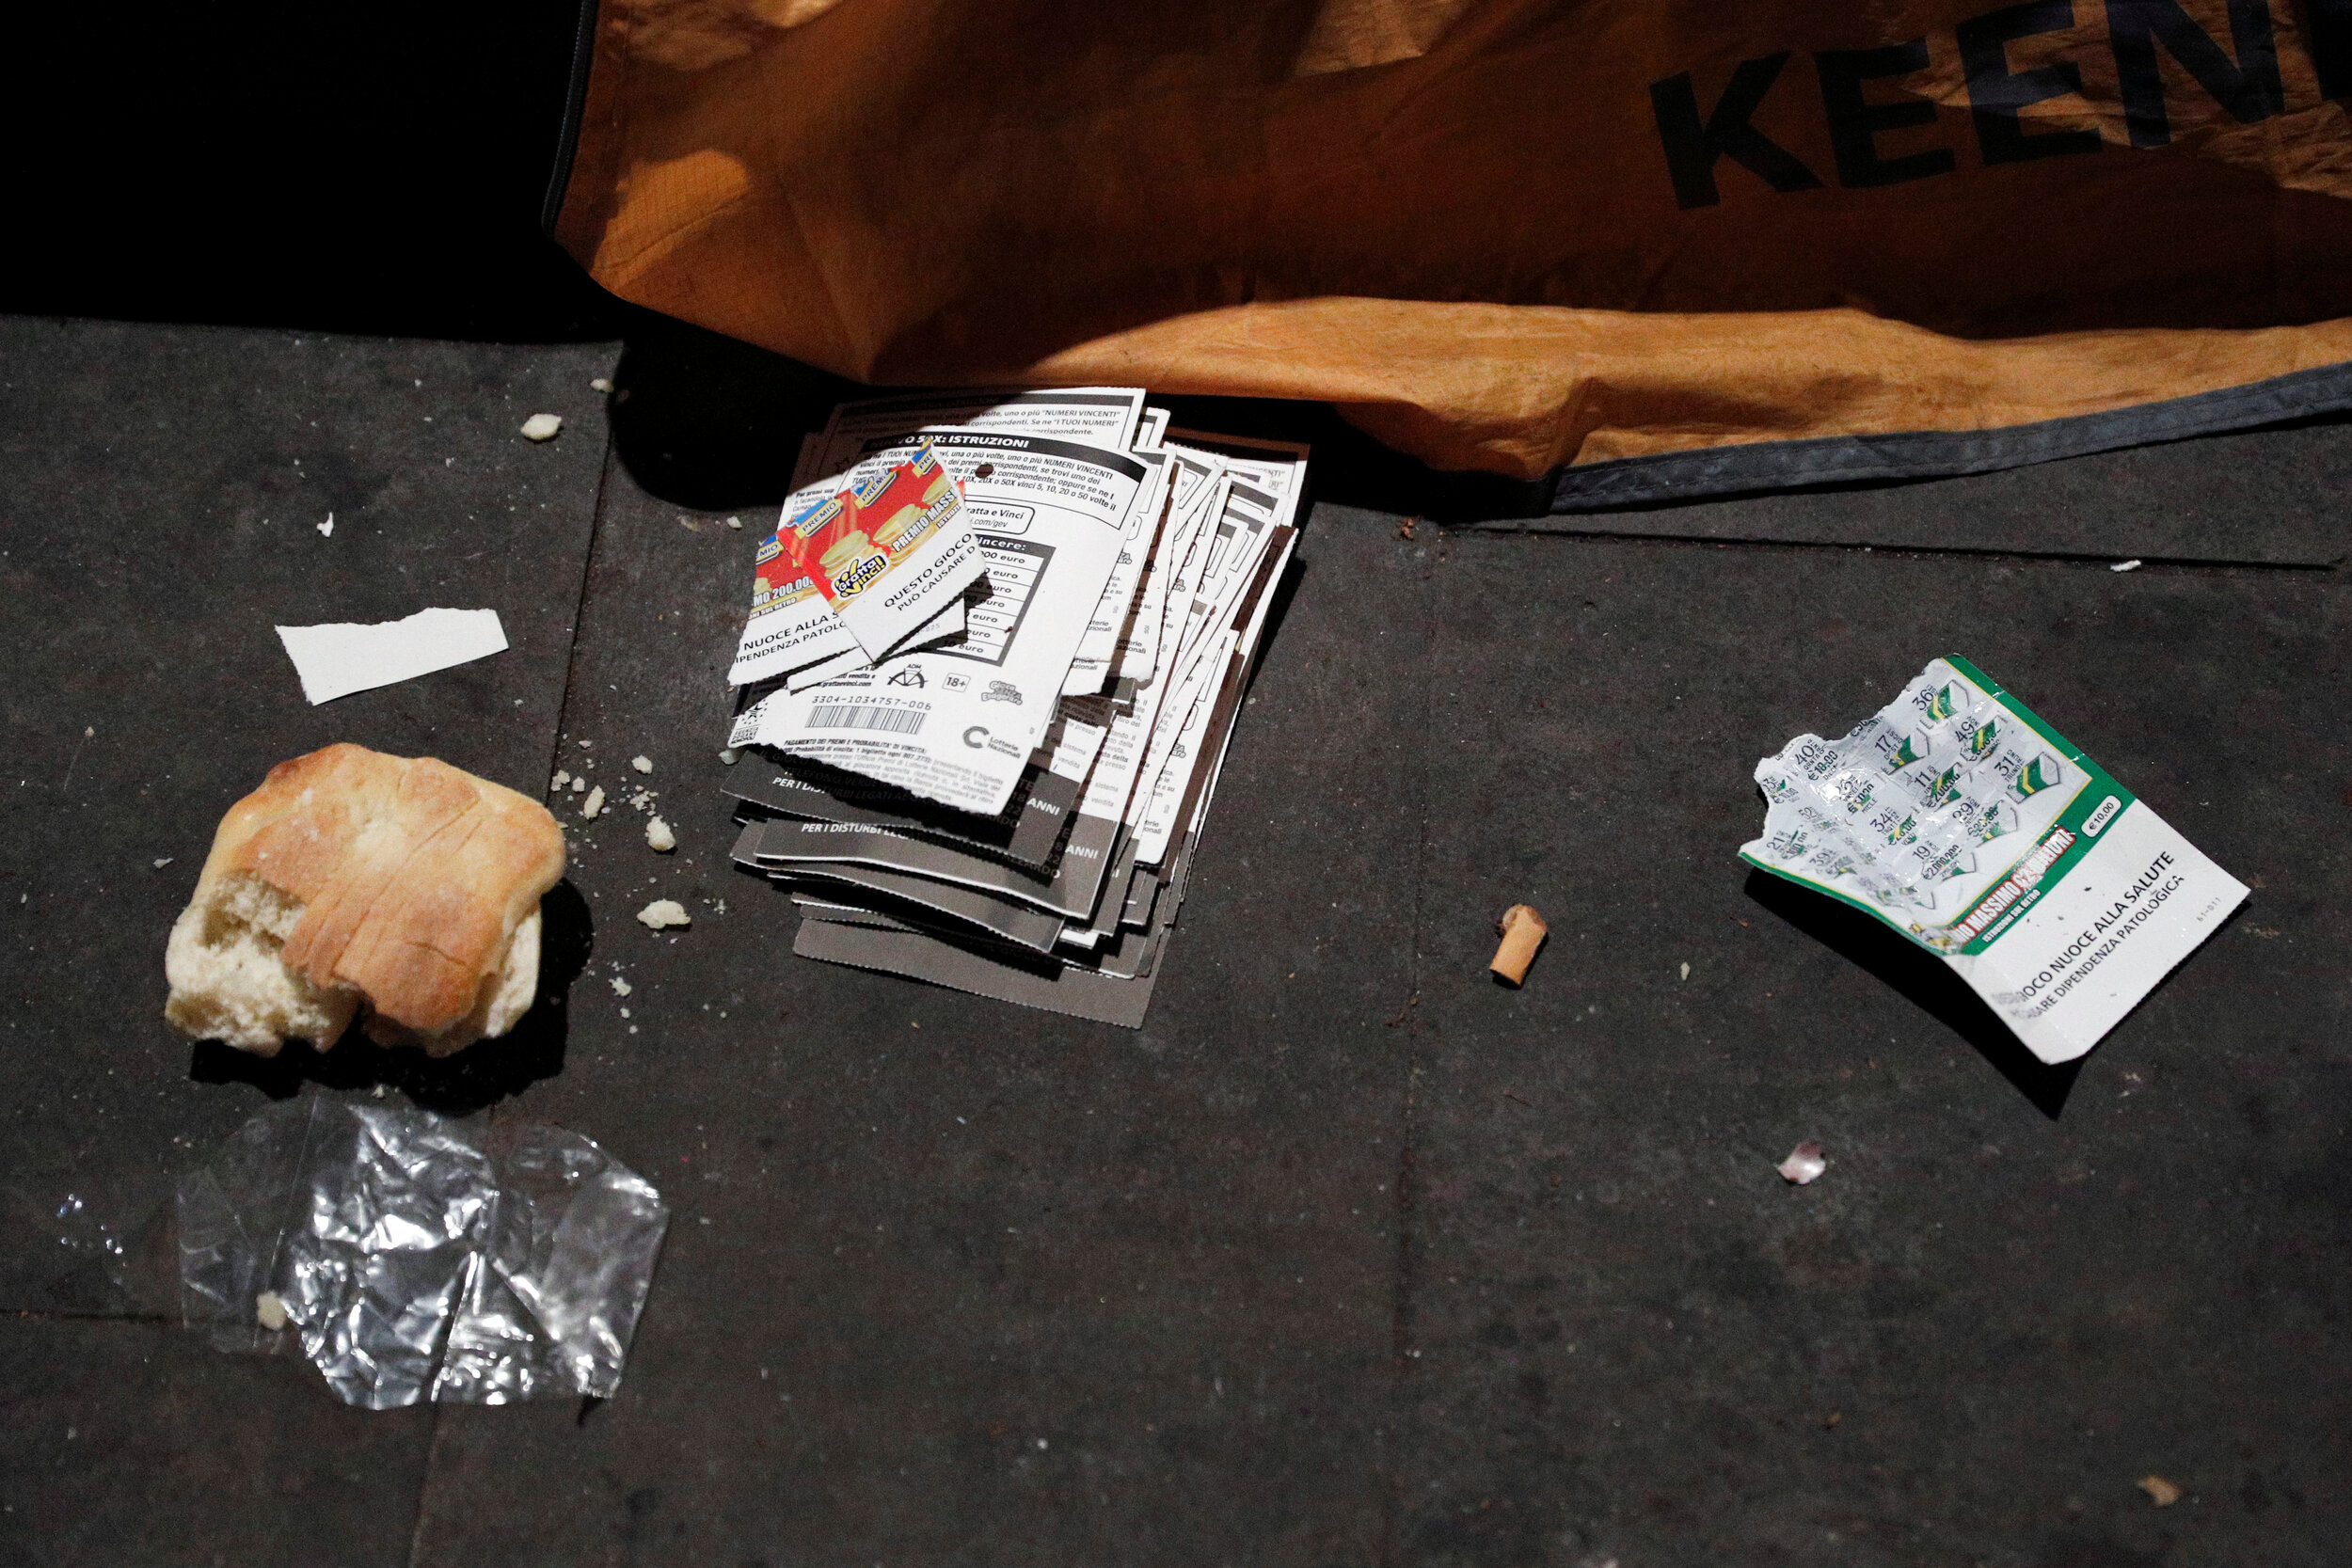  A piece of bread and a stack of lottery tickets are seen outside a tent where a homeless person lives in Rome, Italy, March 17, 2020. Since the coronavirus crisis, Red Cross workers have been increasing their daily activities to meet the growing nee